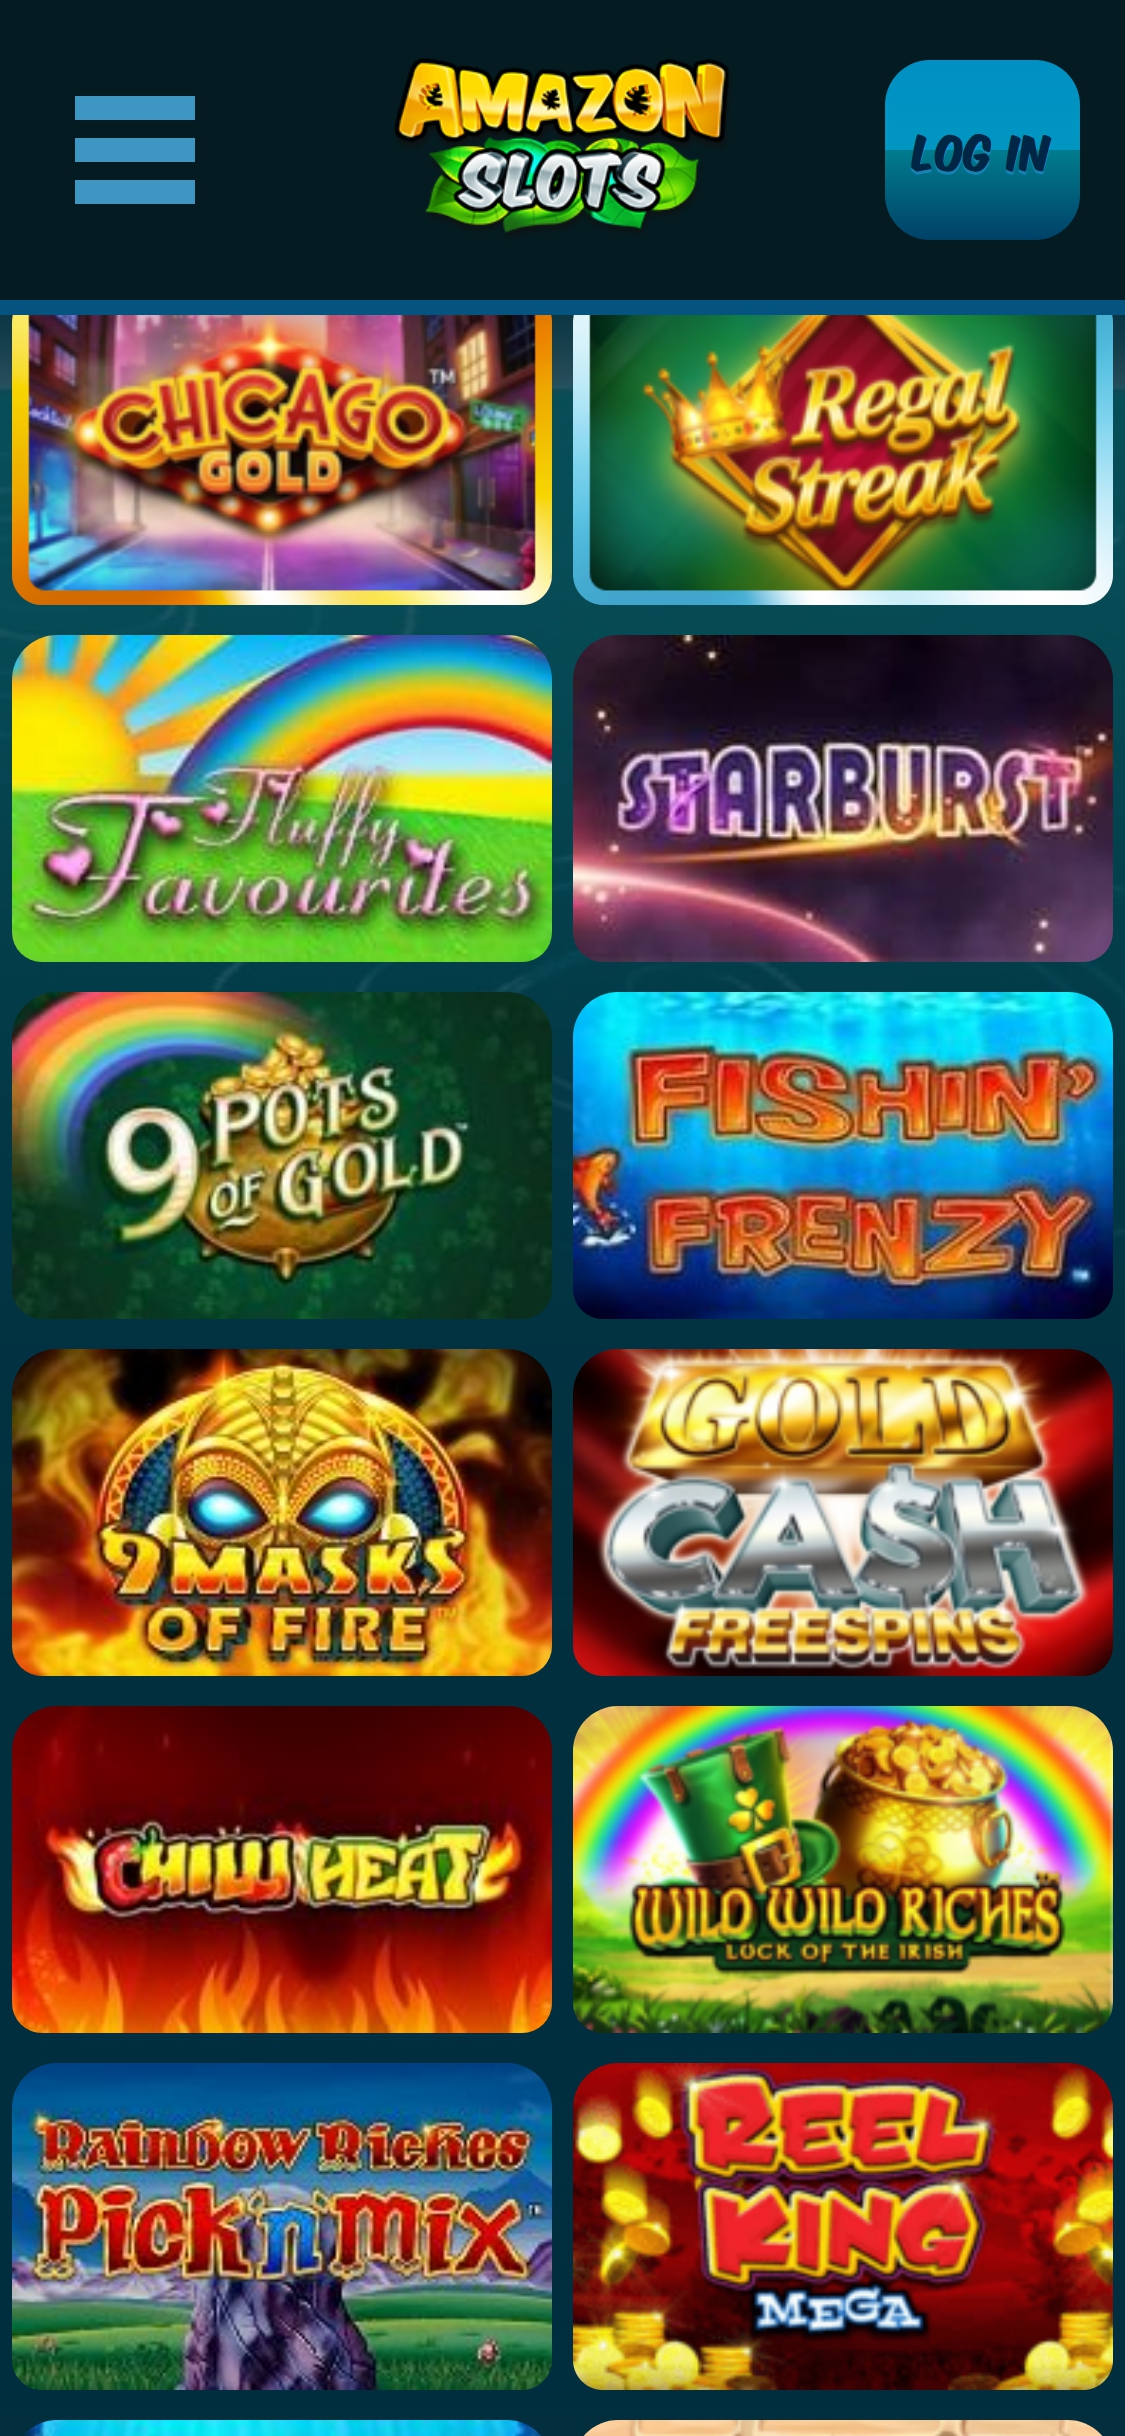 Amazon Slots Casino Mobile Games Review